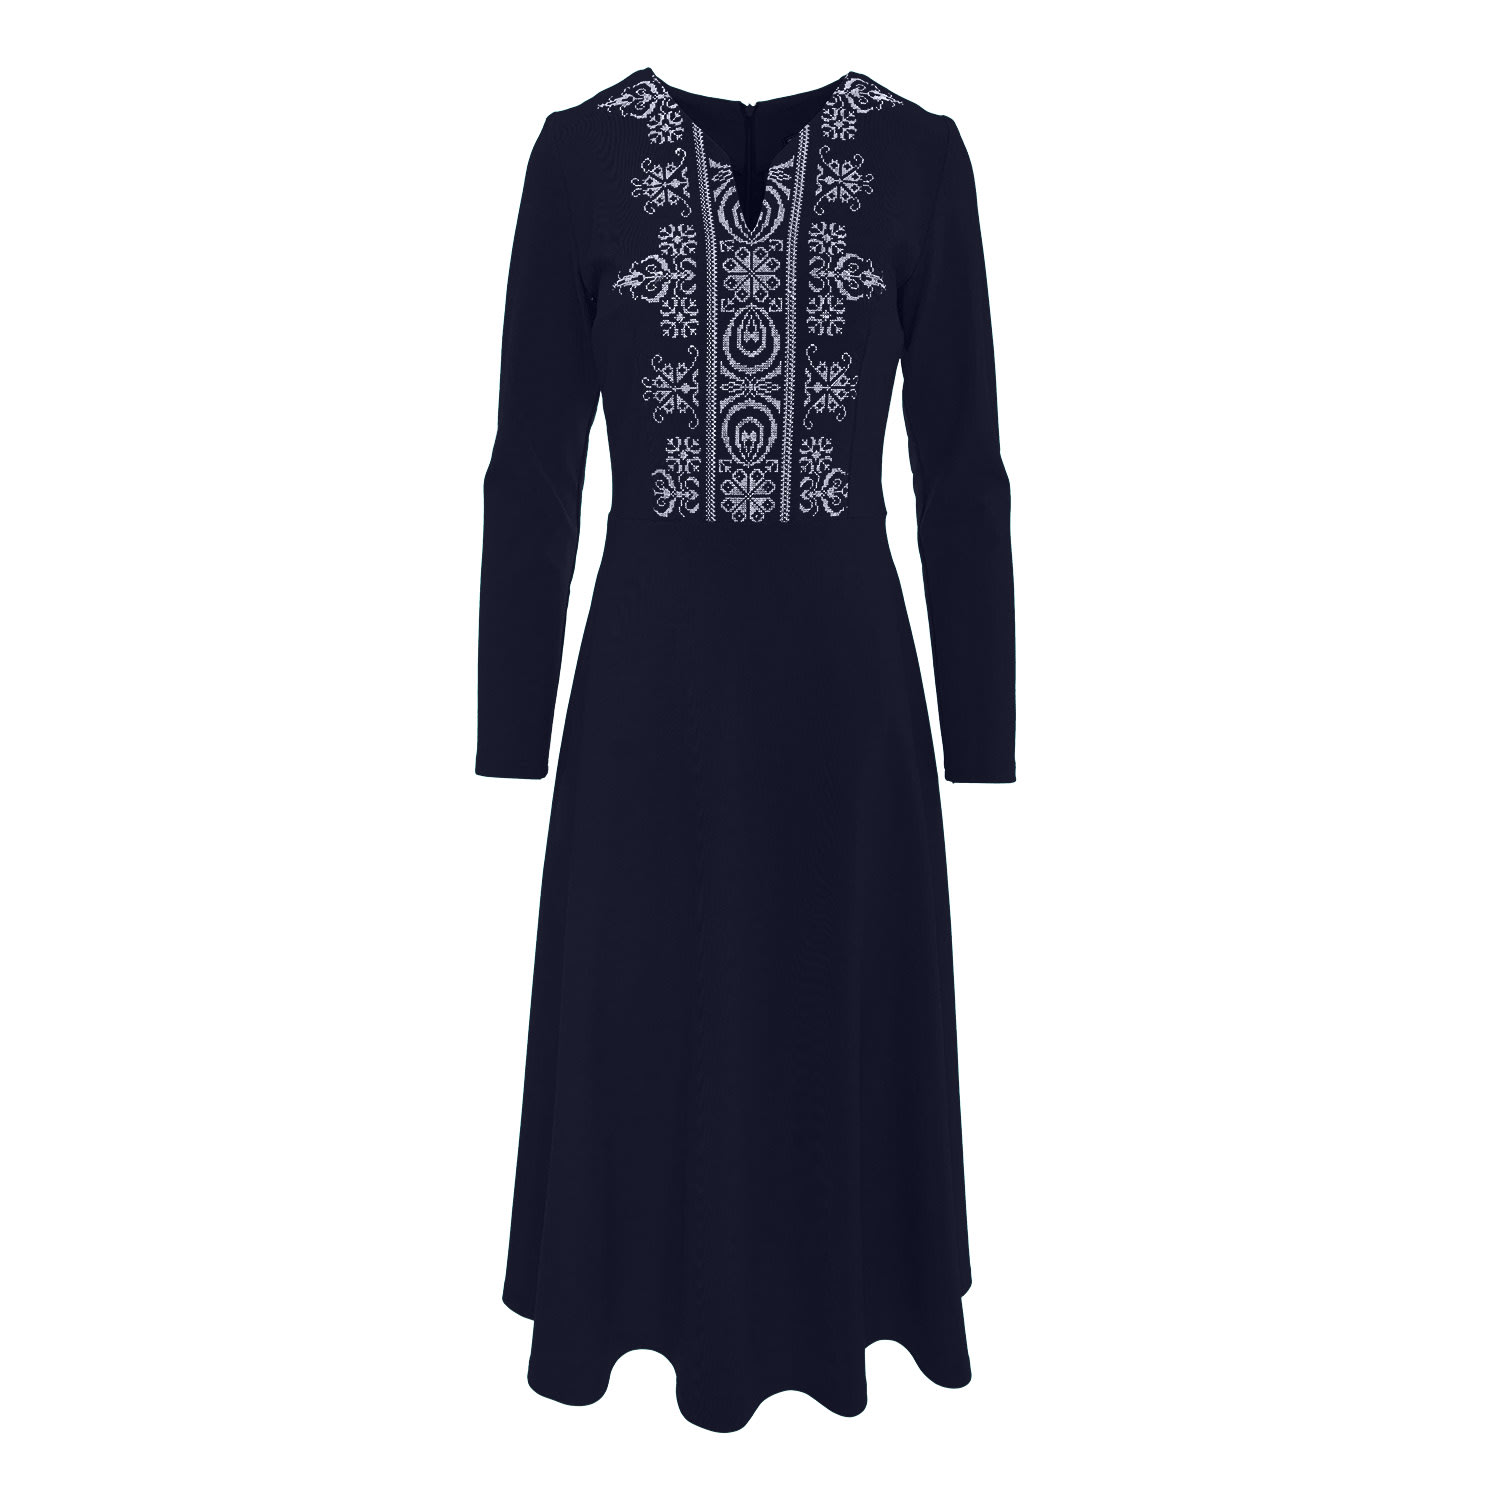 Women’s Midi Dress In Navy Blue Jersey With Floral Embroidery Small Izabela Mandoiu